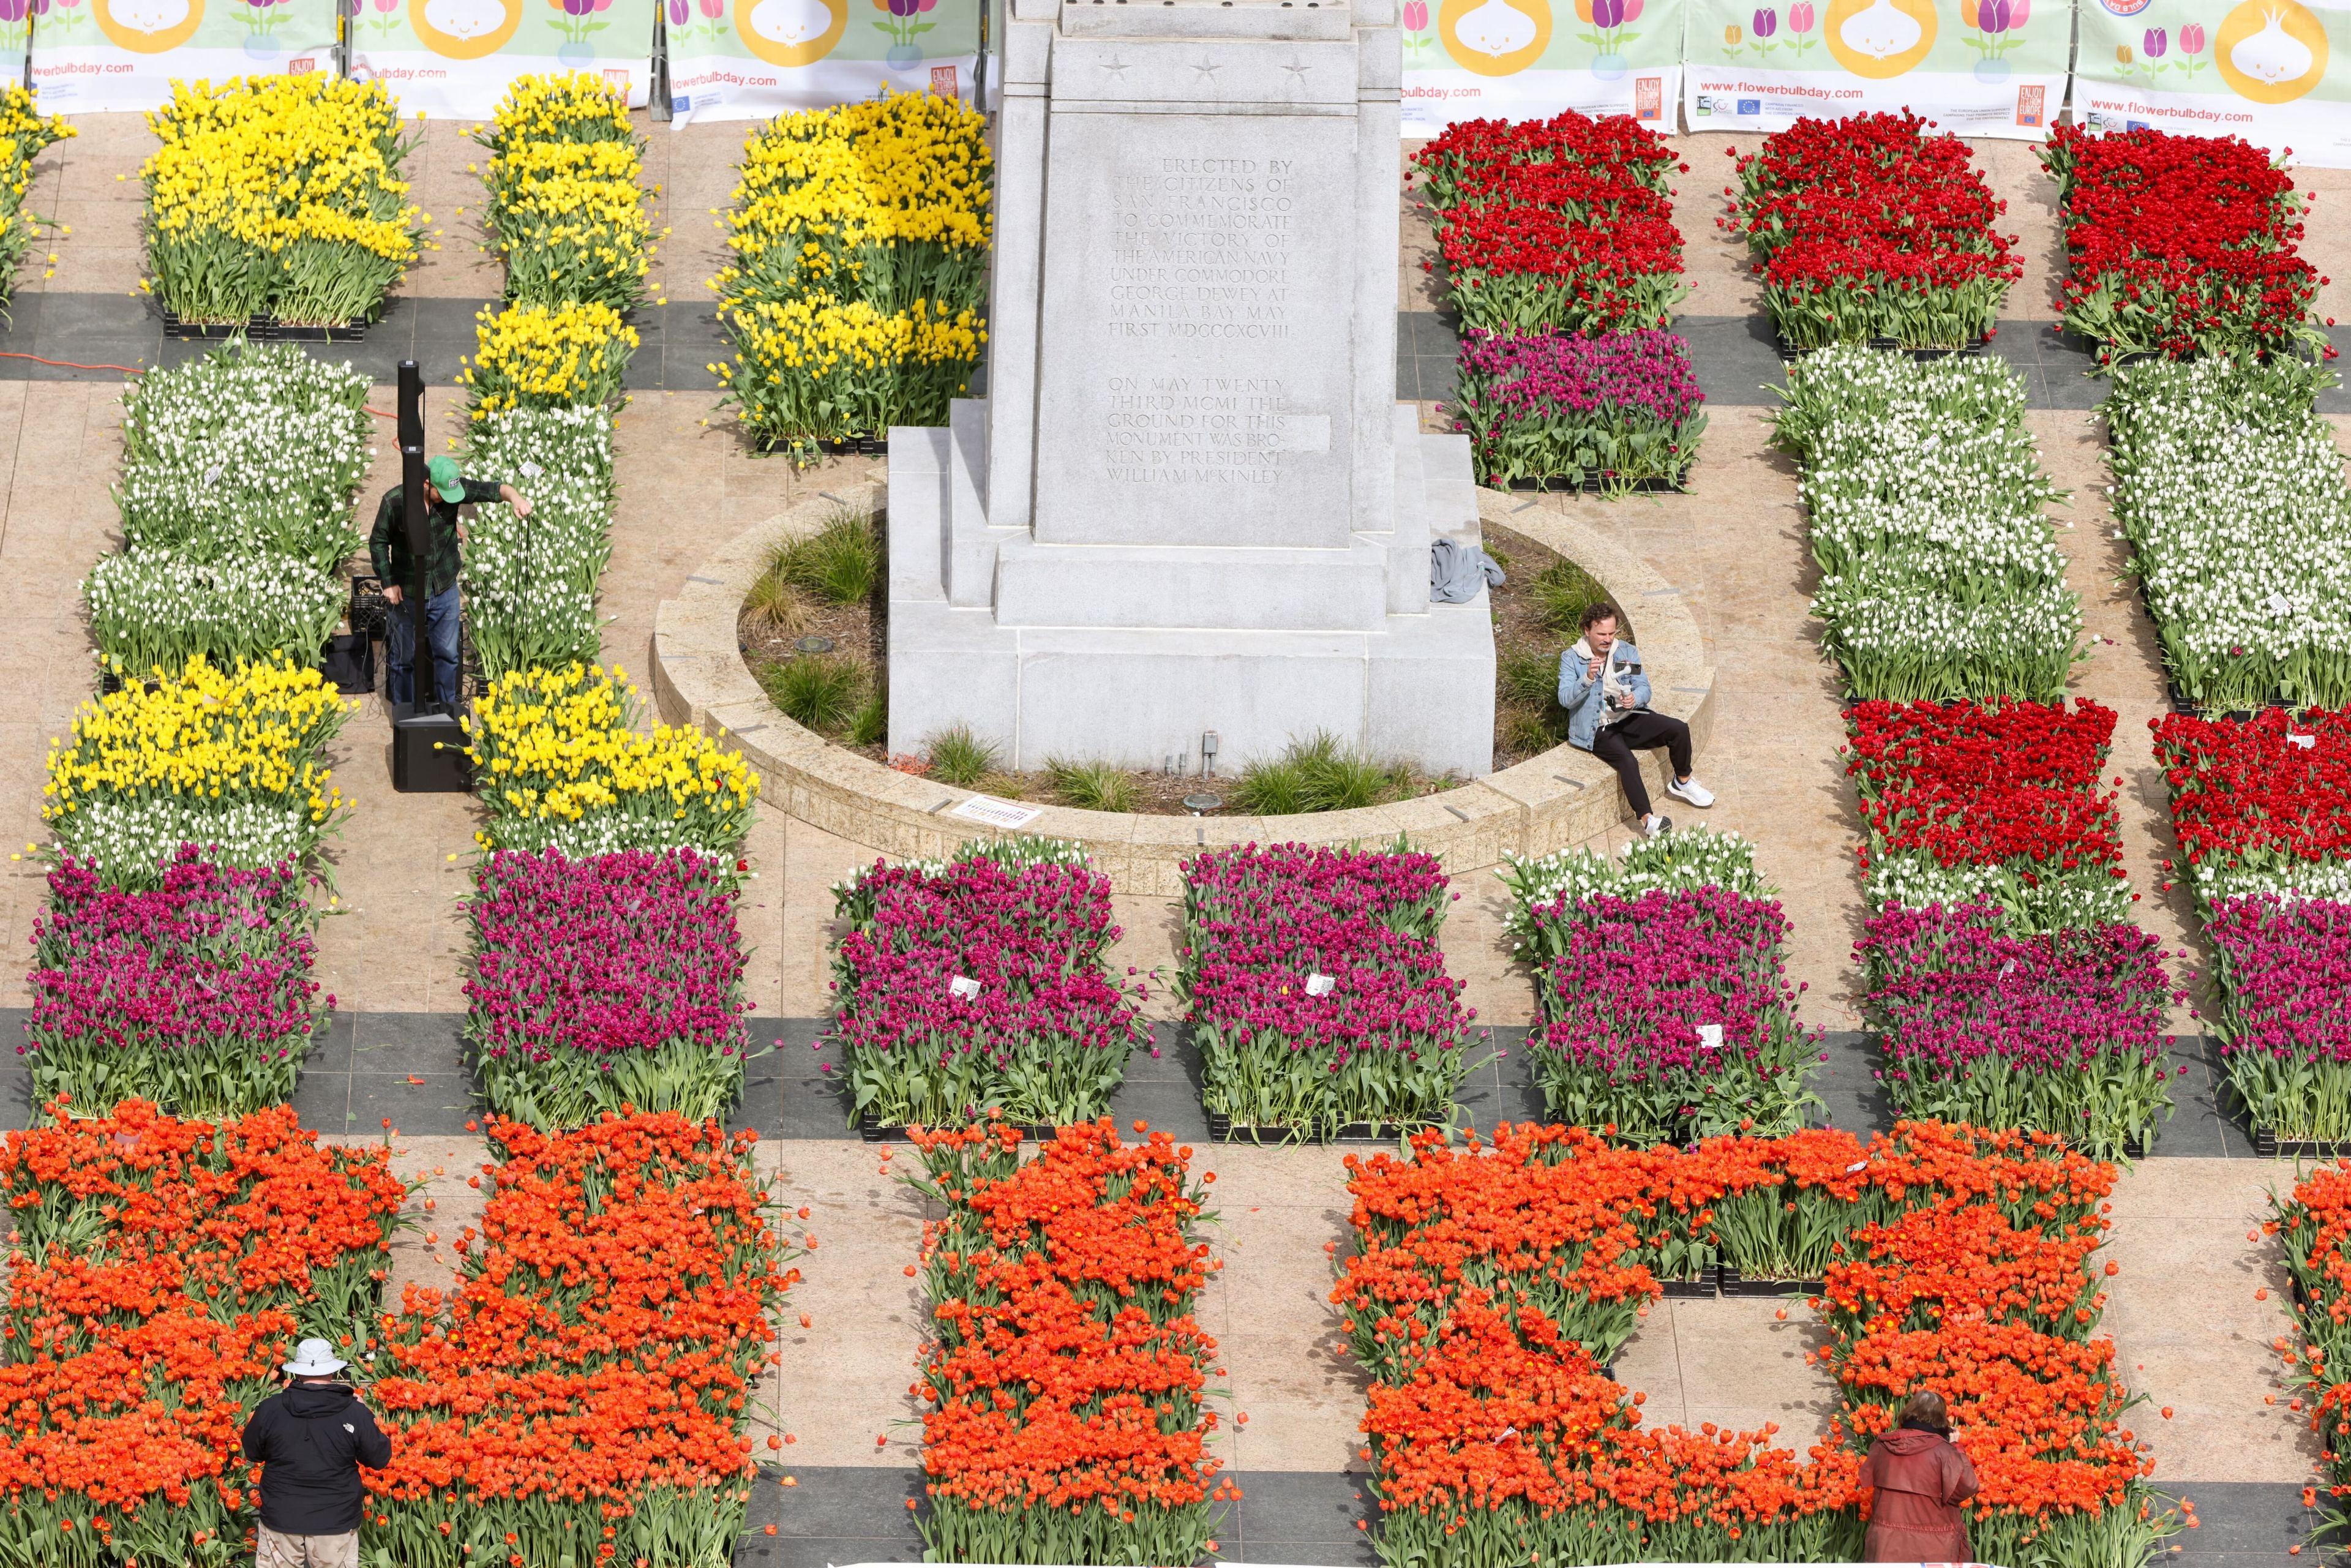 A colorful tulip garden with people, surrounding a central monument.